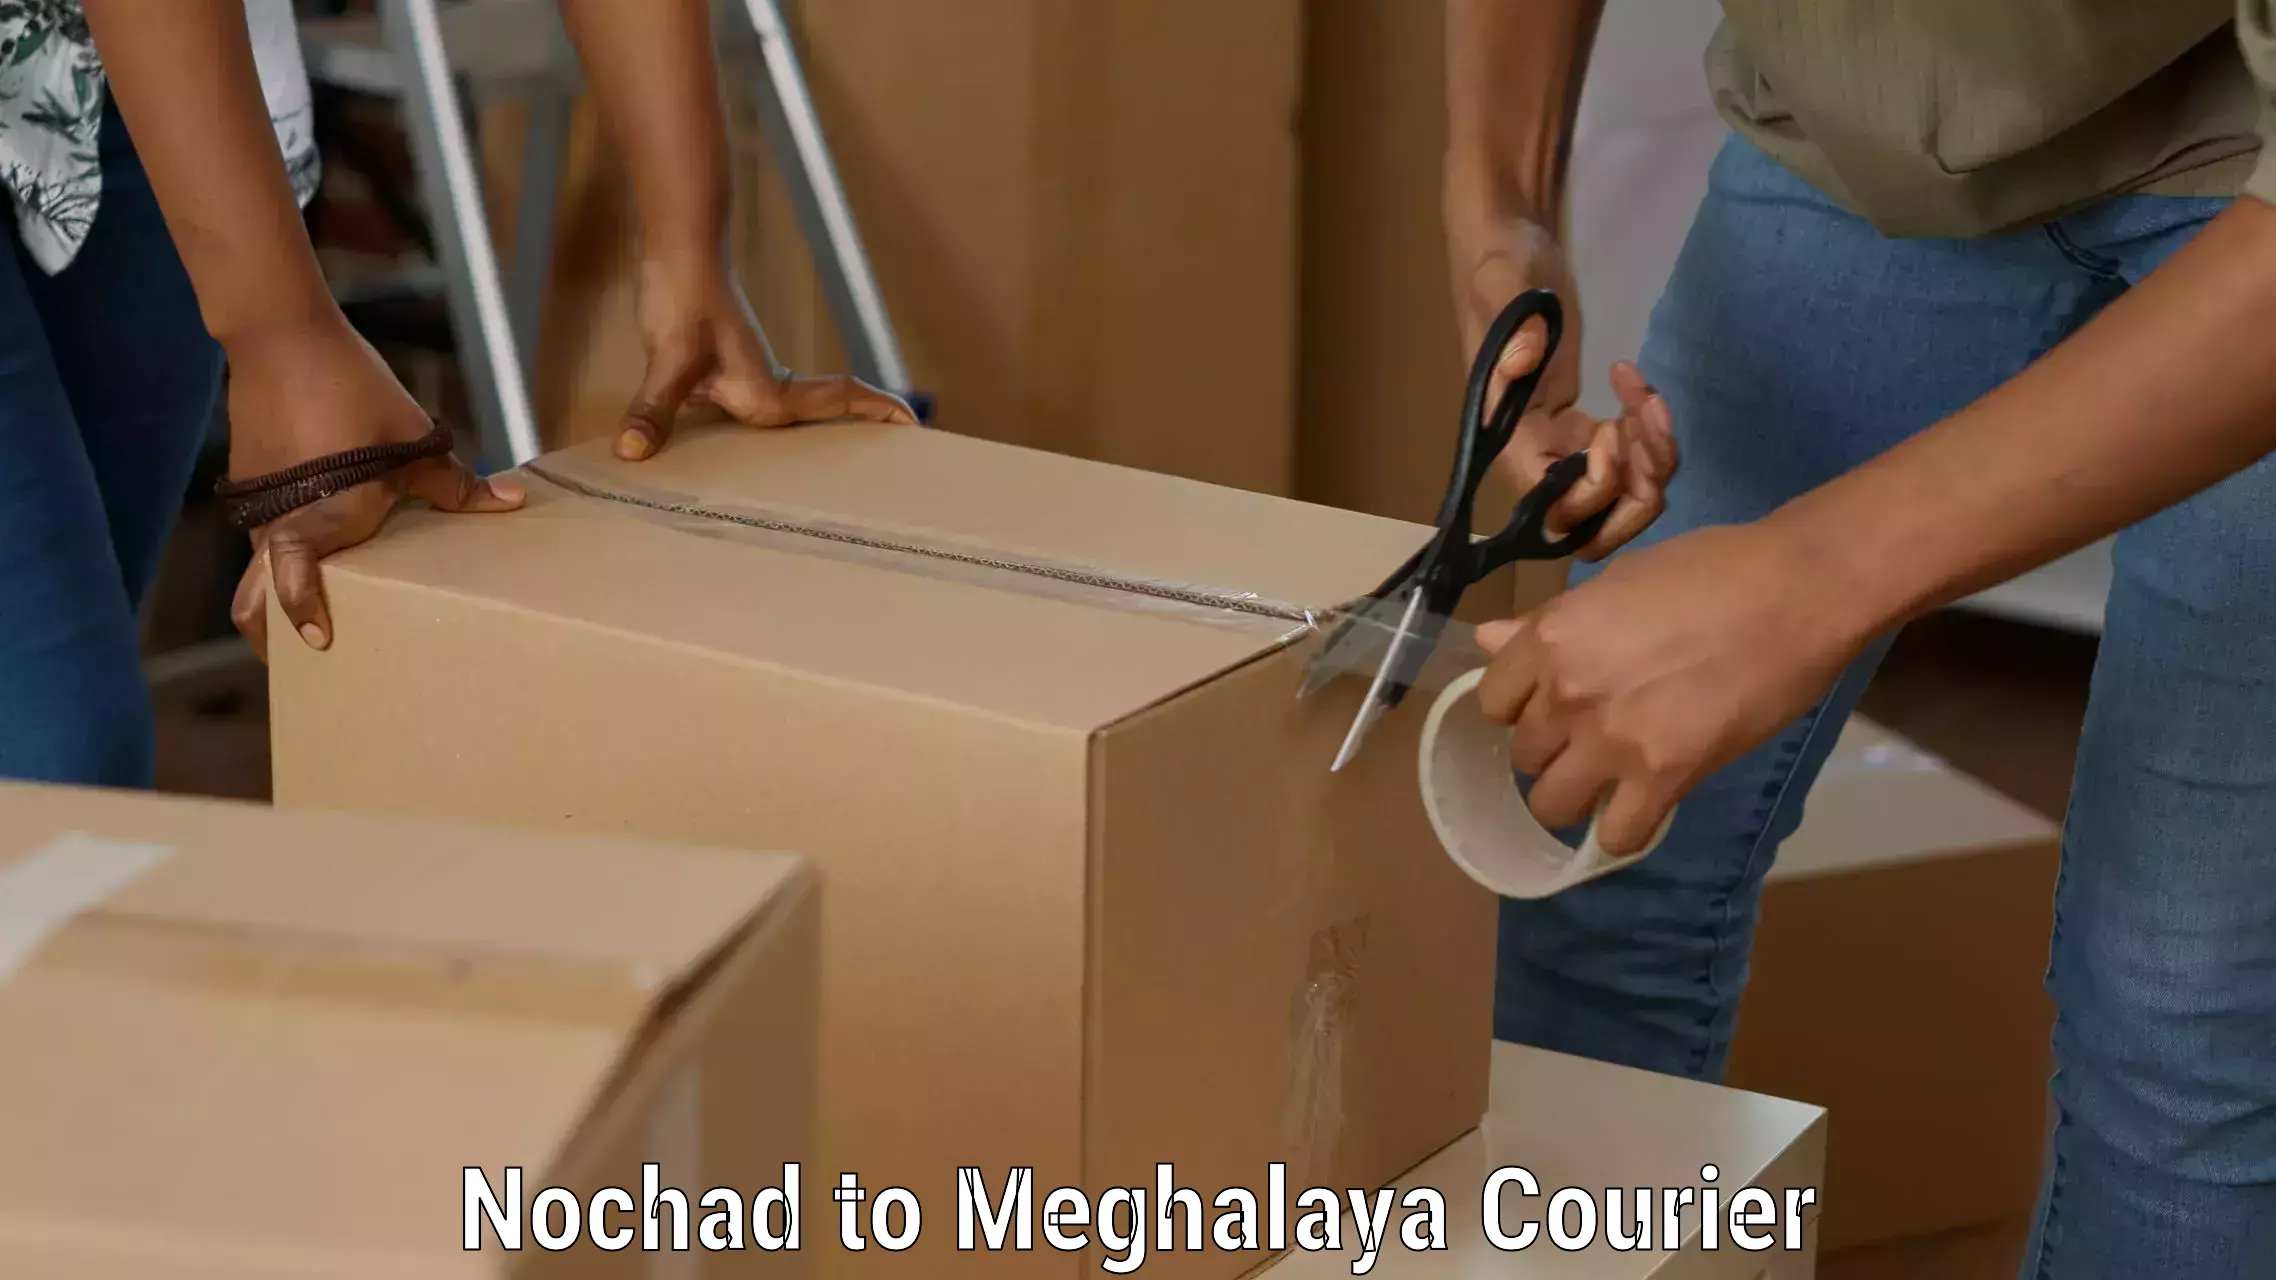 Express delivery solutions Nochad to Shillong